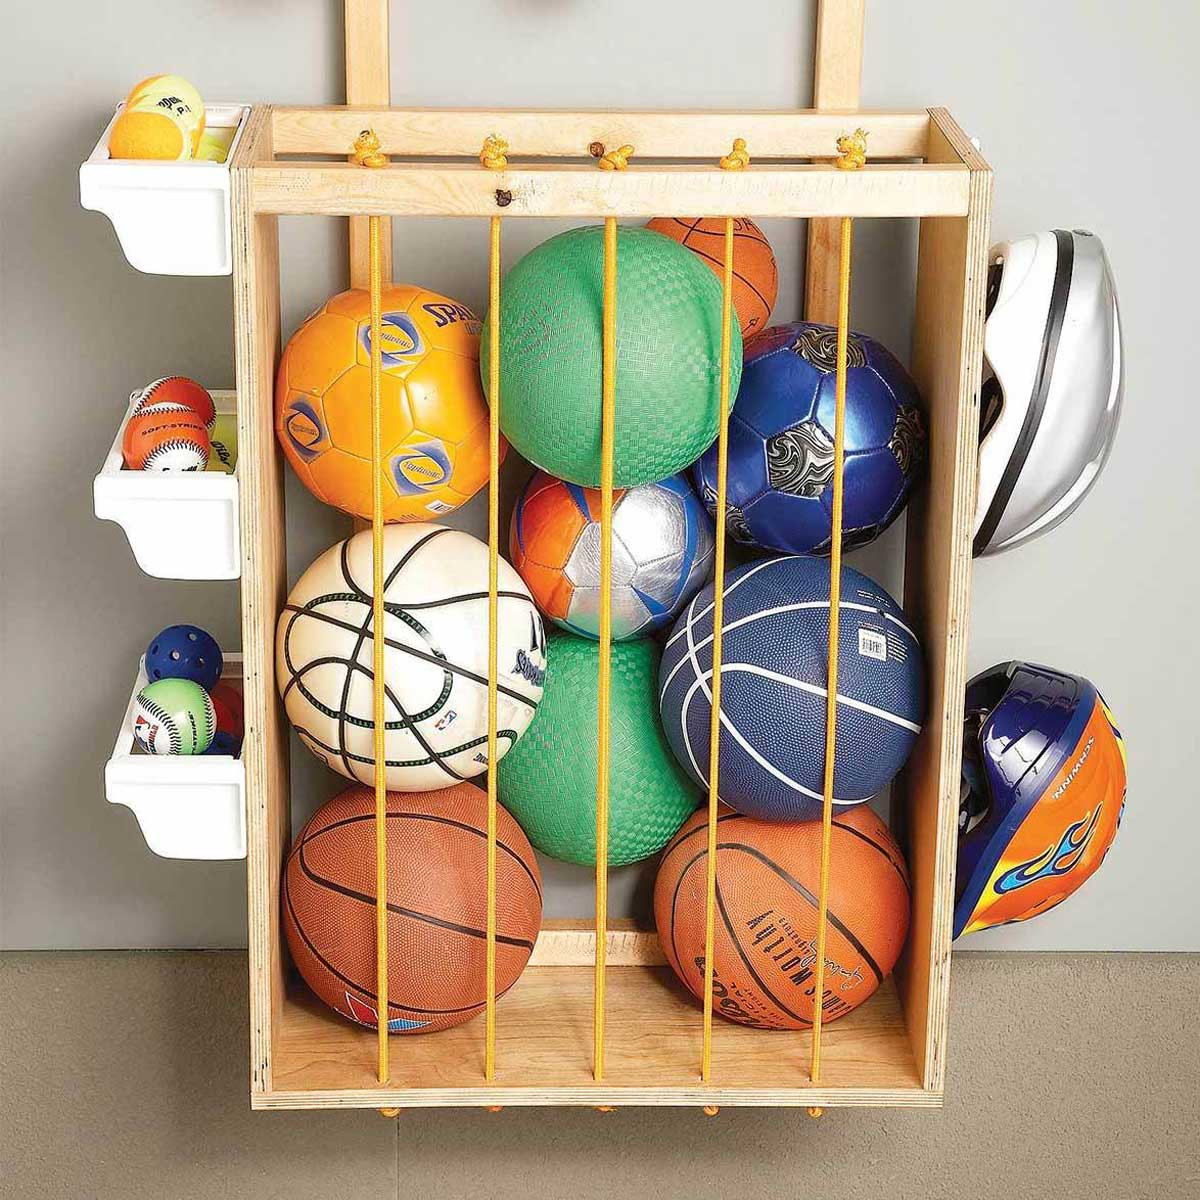 Garage Ball Organizer
 10 Tips for Organizing Your Garage and Keeping It